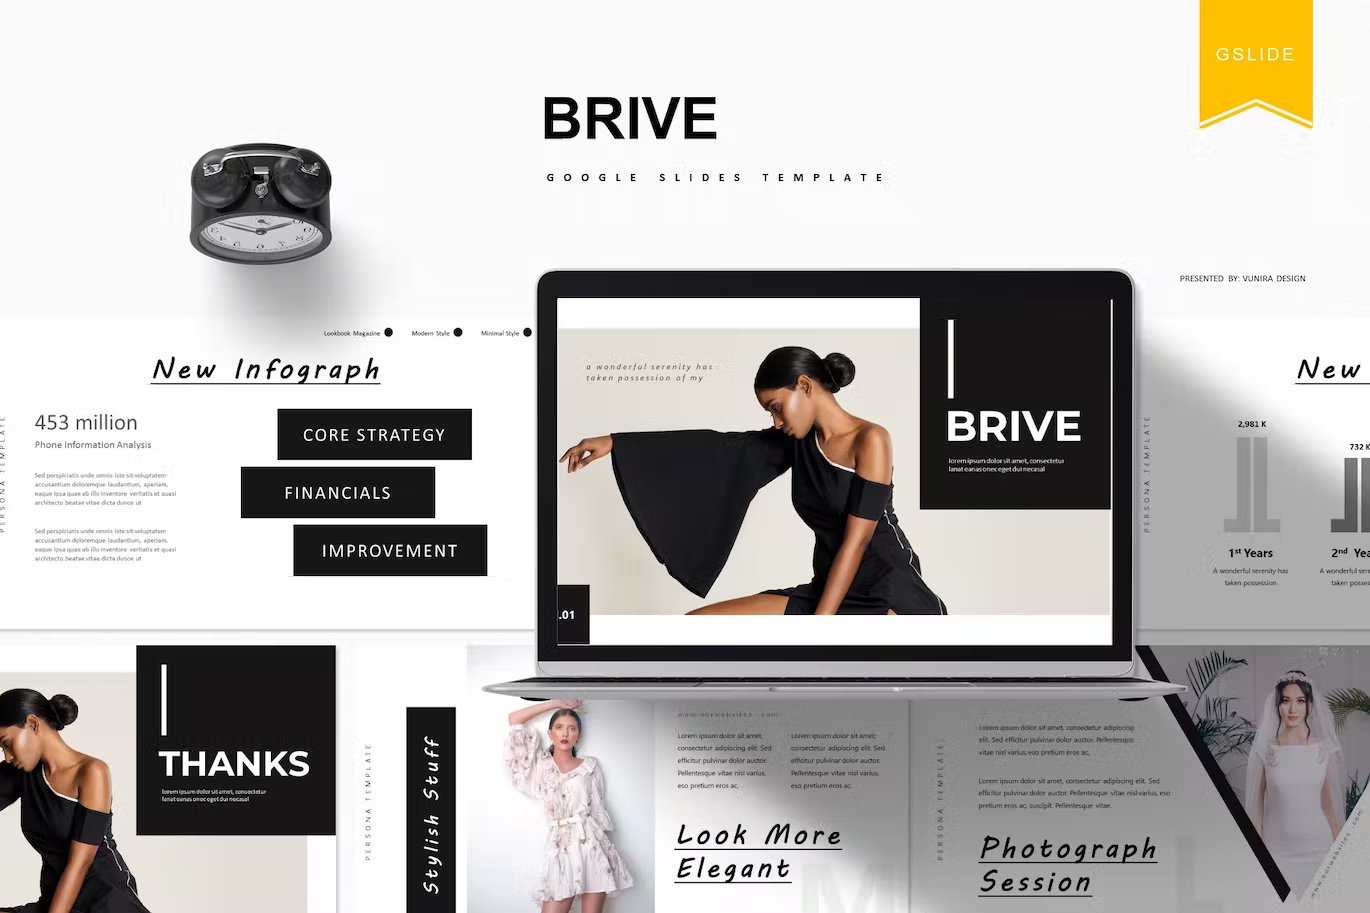 Black lettering "Brive Google Slides Template" and different templates on a gray background.